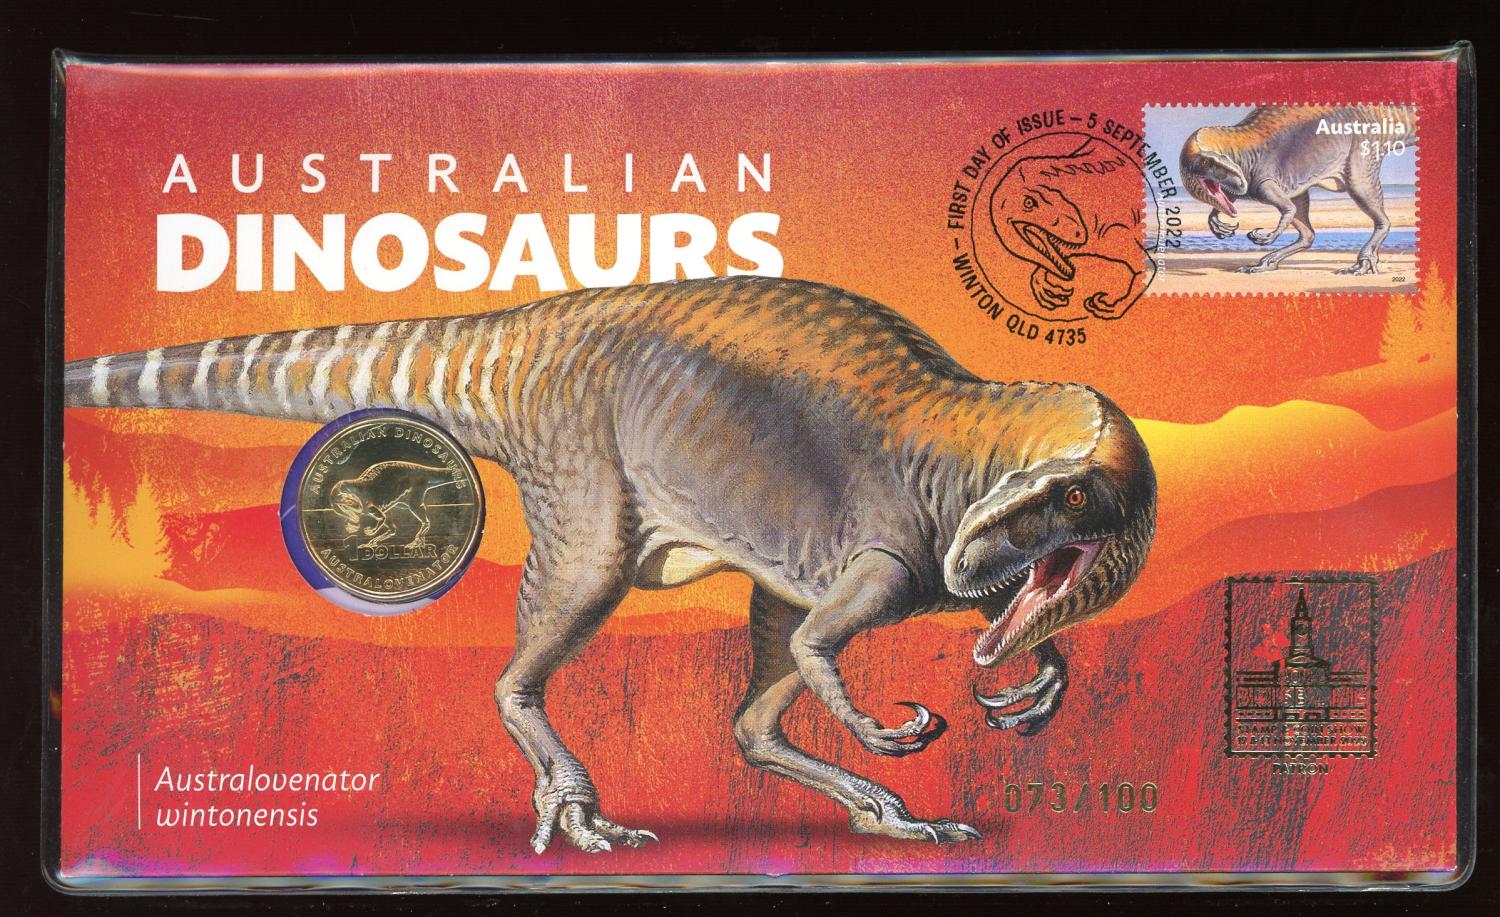 Thumbnail for 2022 Australian Dinosaurs PNC - Brisbane Stamp and Coin Show with Gold Foil Overprint 073-100